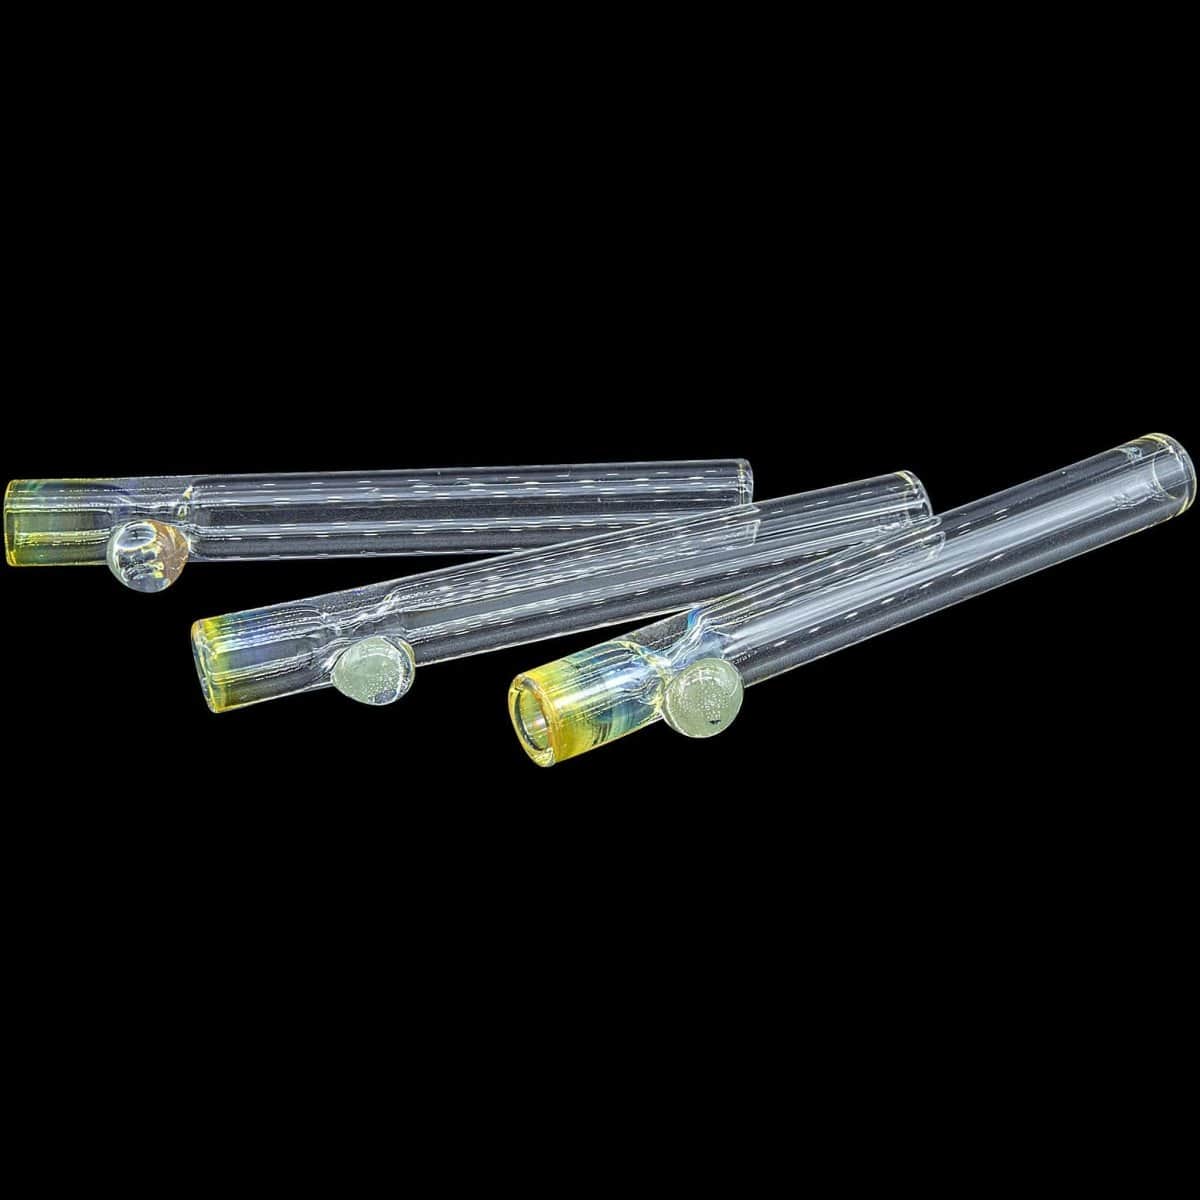 LA Pipes Hand Pipe "One Hitter Never Quitter" Glass One-Hitter